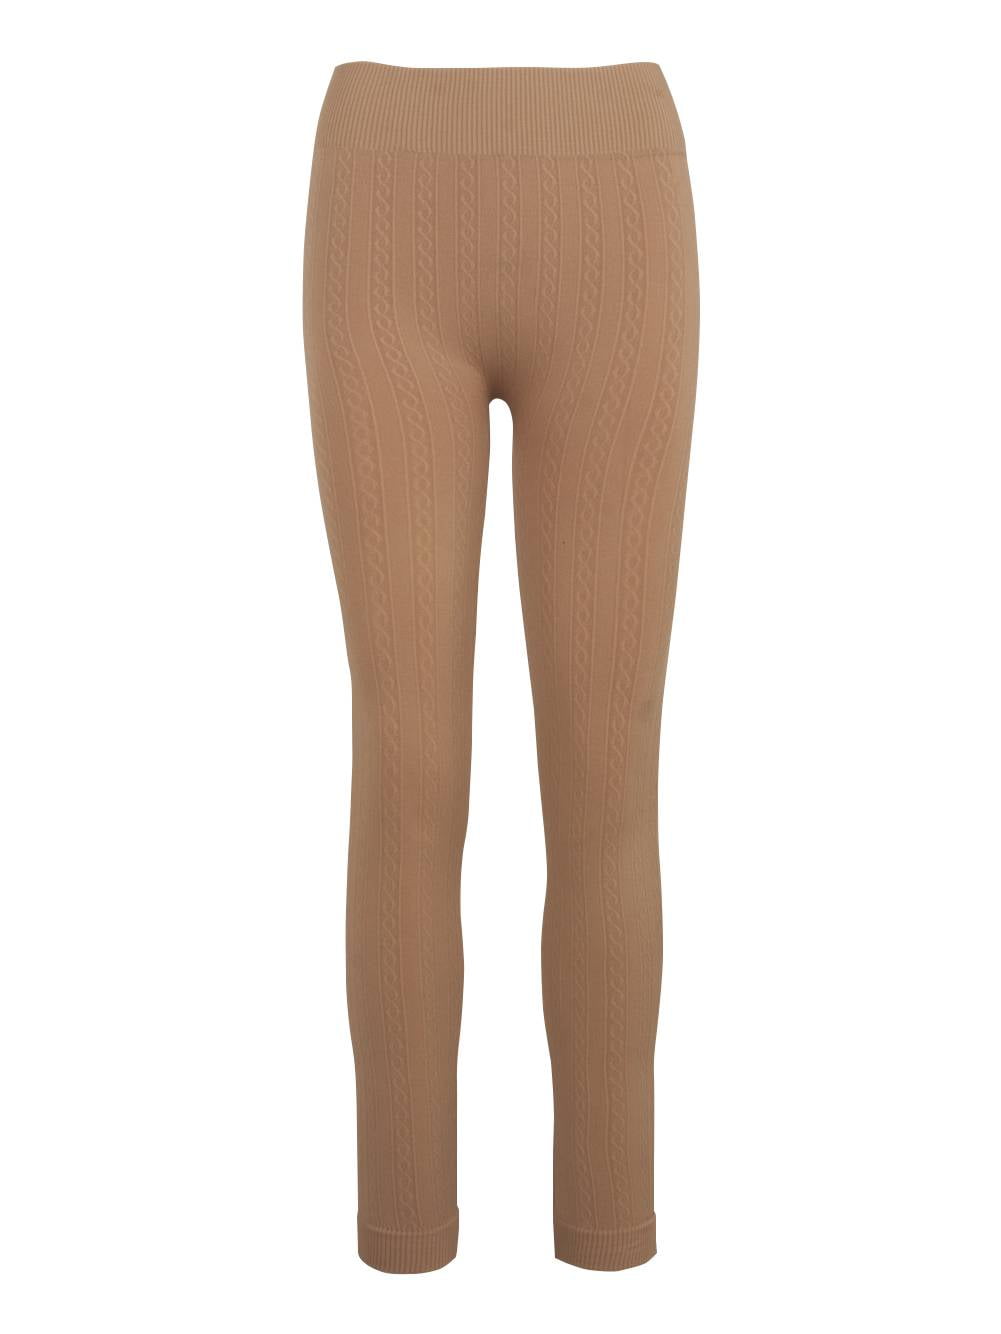 Cable Knit Leggings - Camel